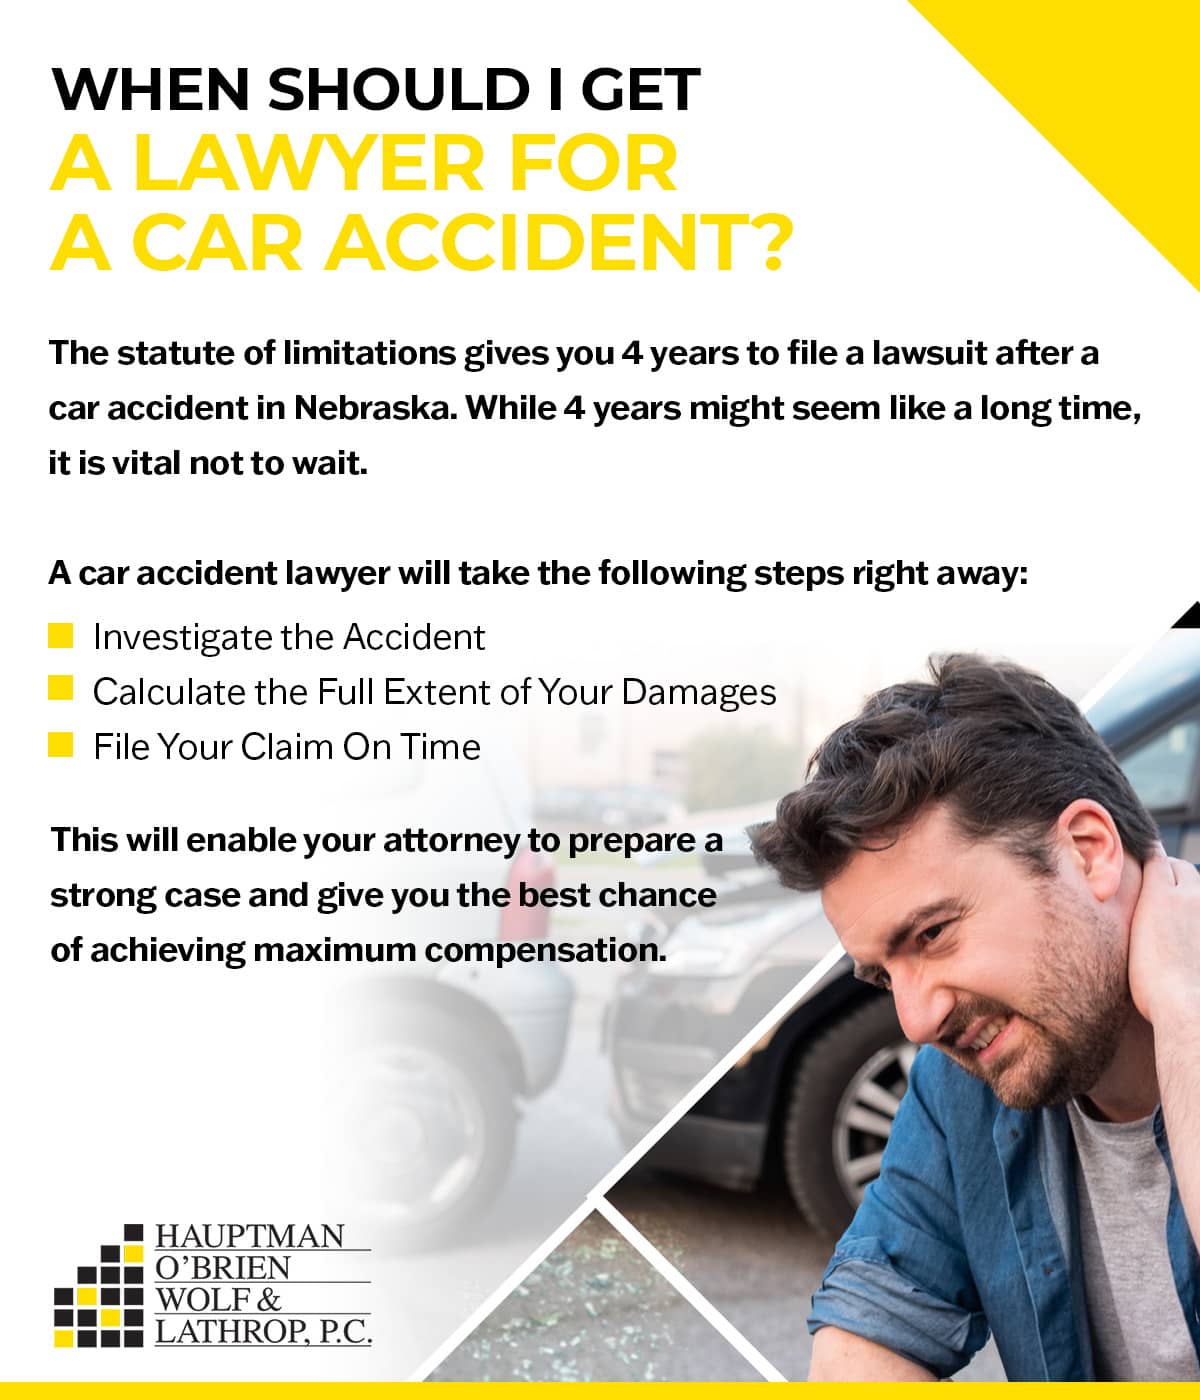 When should I get a lawyer for a car accident? | Hauptman, O'Brien, Wolf & Lathrop